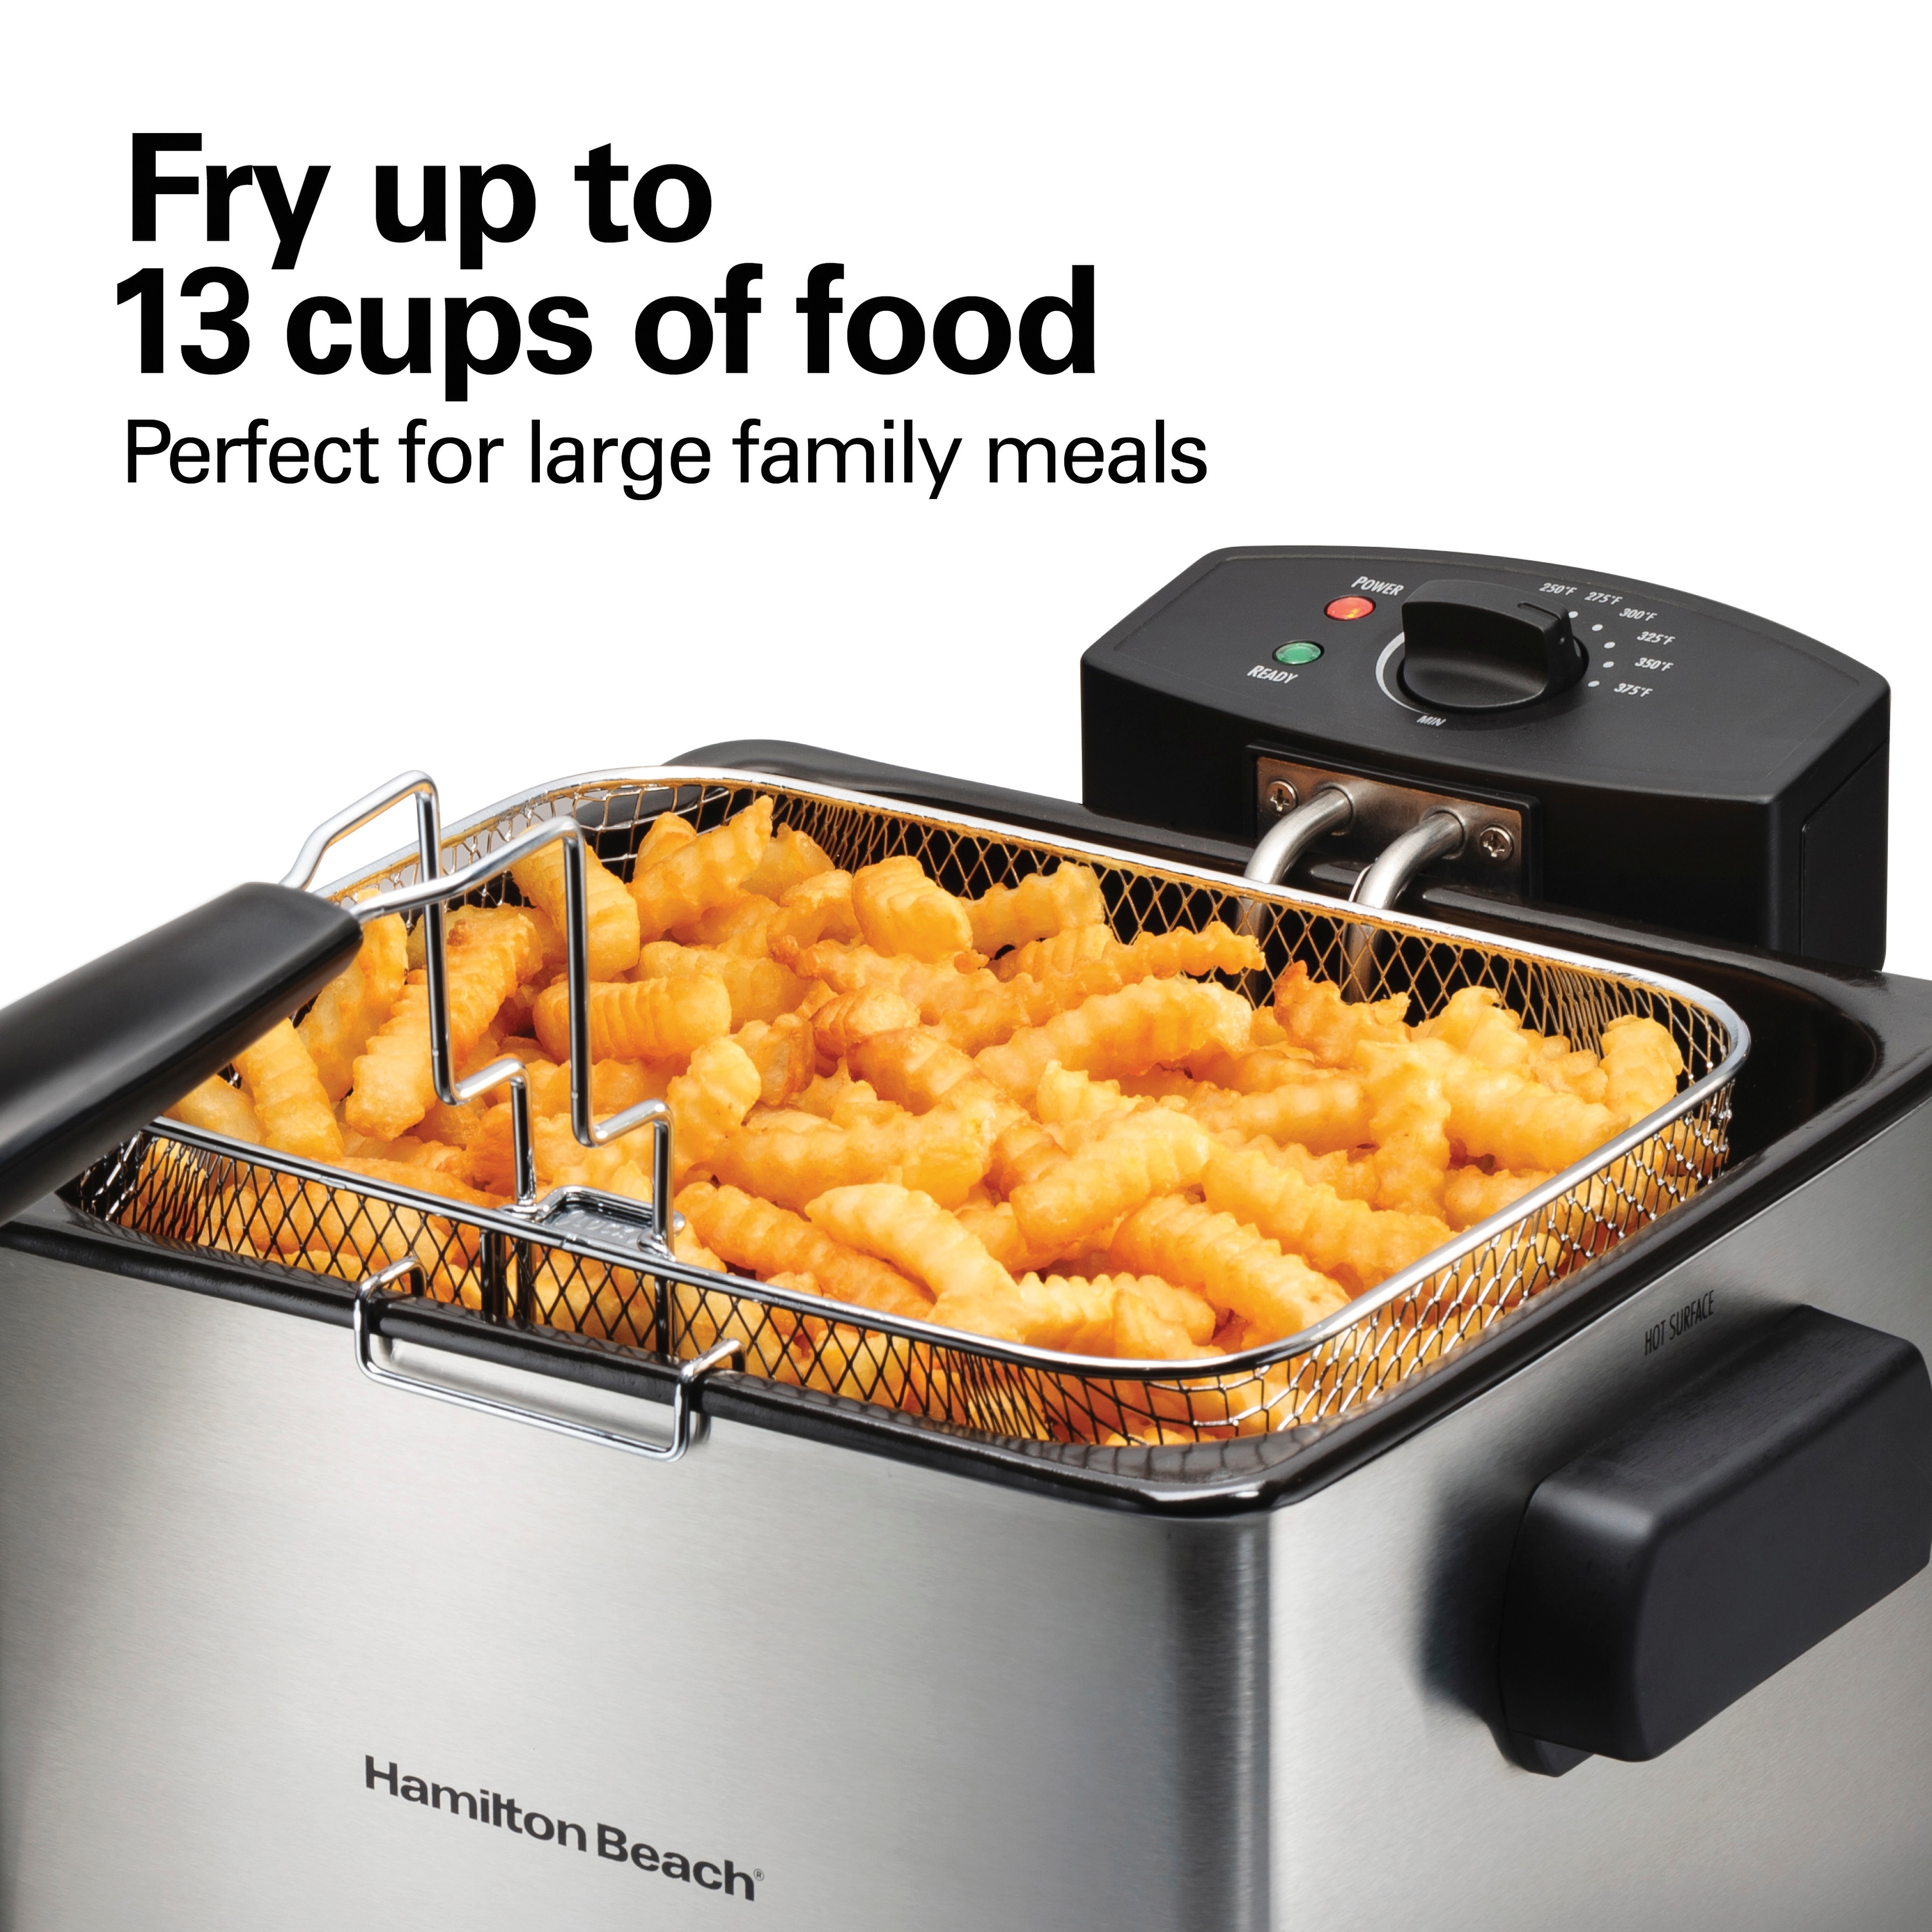 https://ak1.ostkcdn.com/images/products/is/images/direct/939c880a49742eee07276f99e283cab99ac26038/Hamilton-Beach-21-Cup-Deep-Fryer.jpg